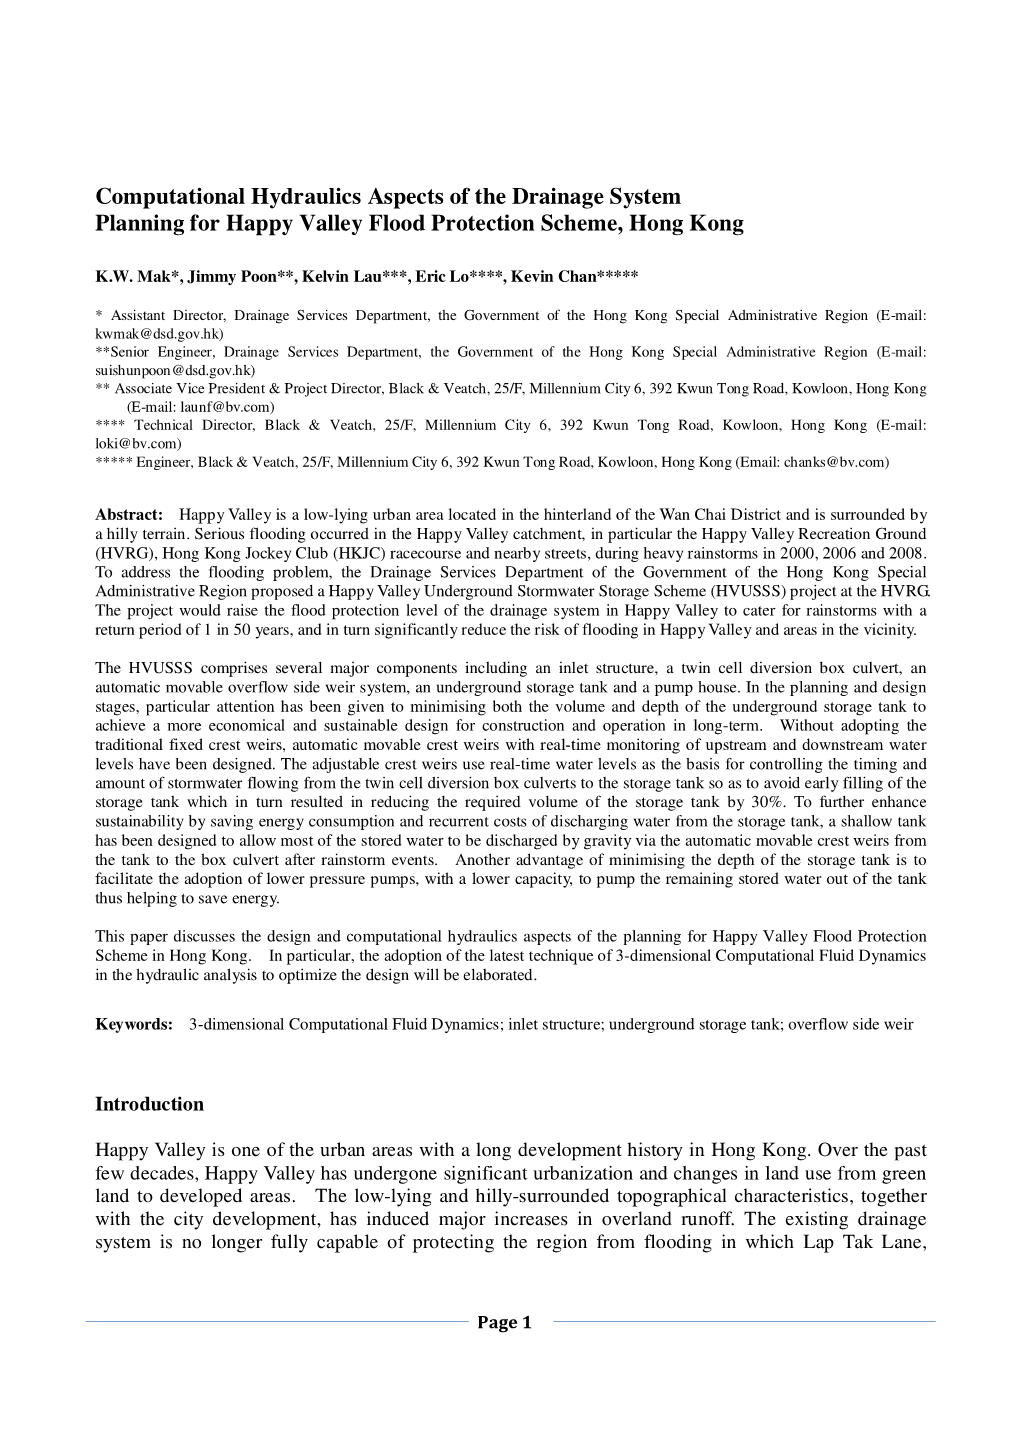 Computational Hydraulics Aspects of the Drainage System Planning for Happy Valley Flood Protection Scheme, Hong Kong